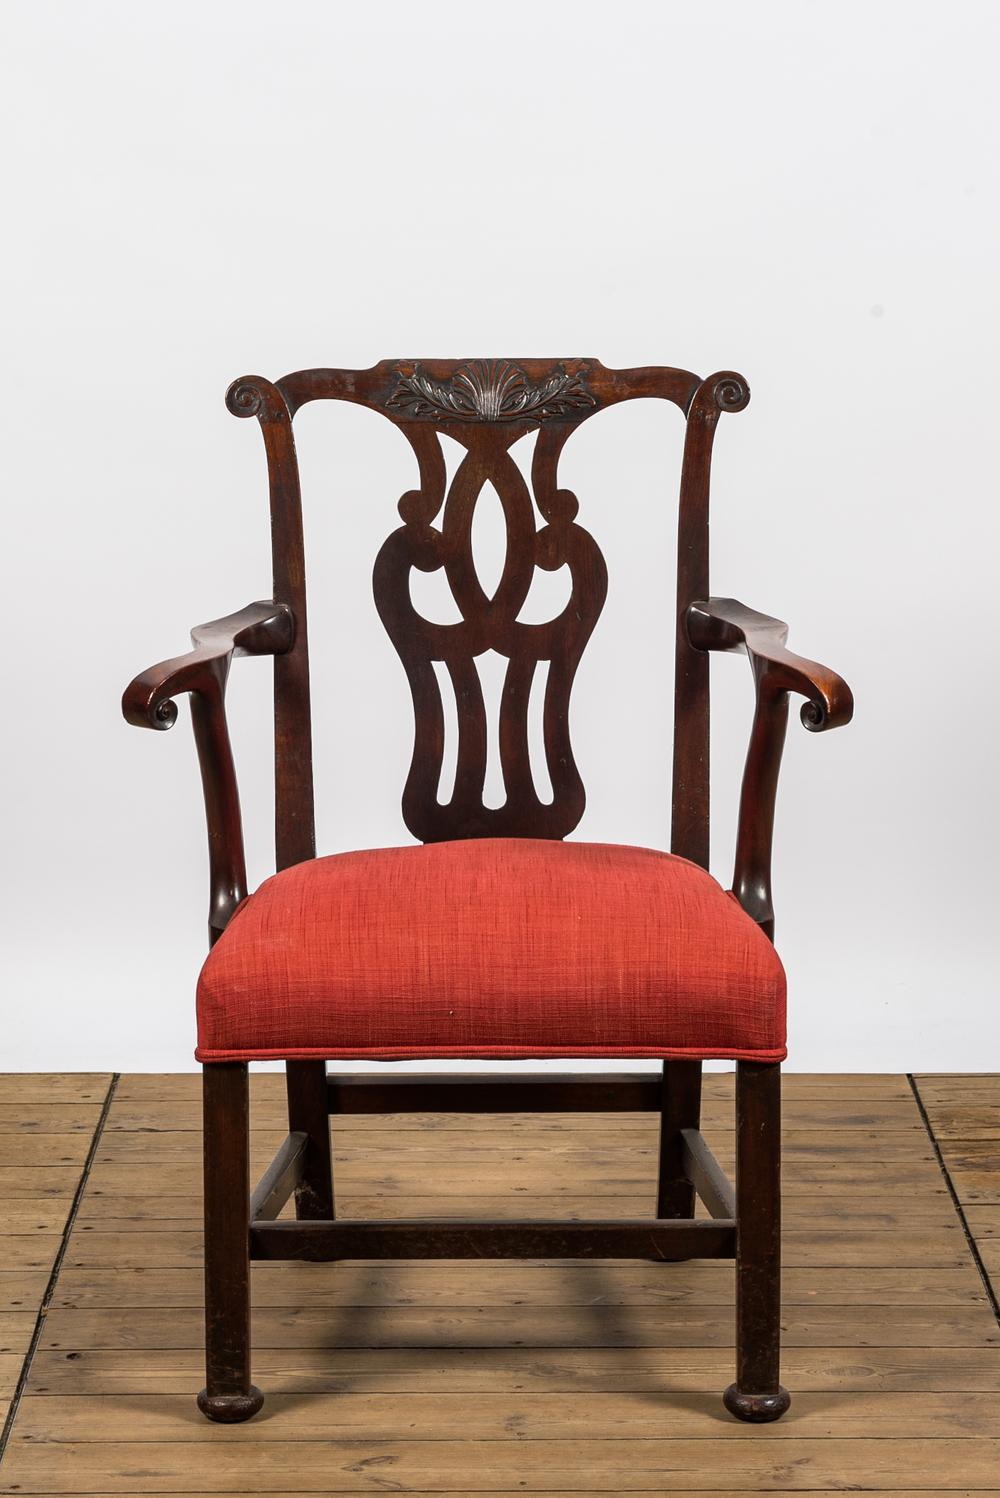 Upholstery Stunning 18th Century George III Period Mahogany Chippendale Armchair For Sale